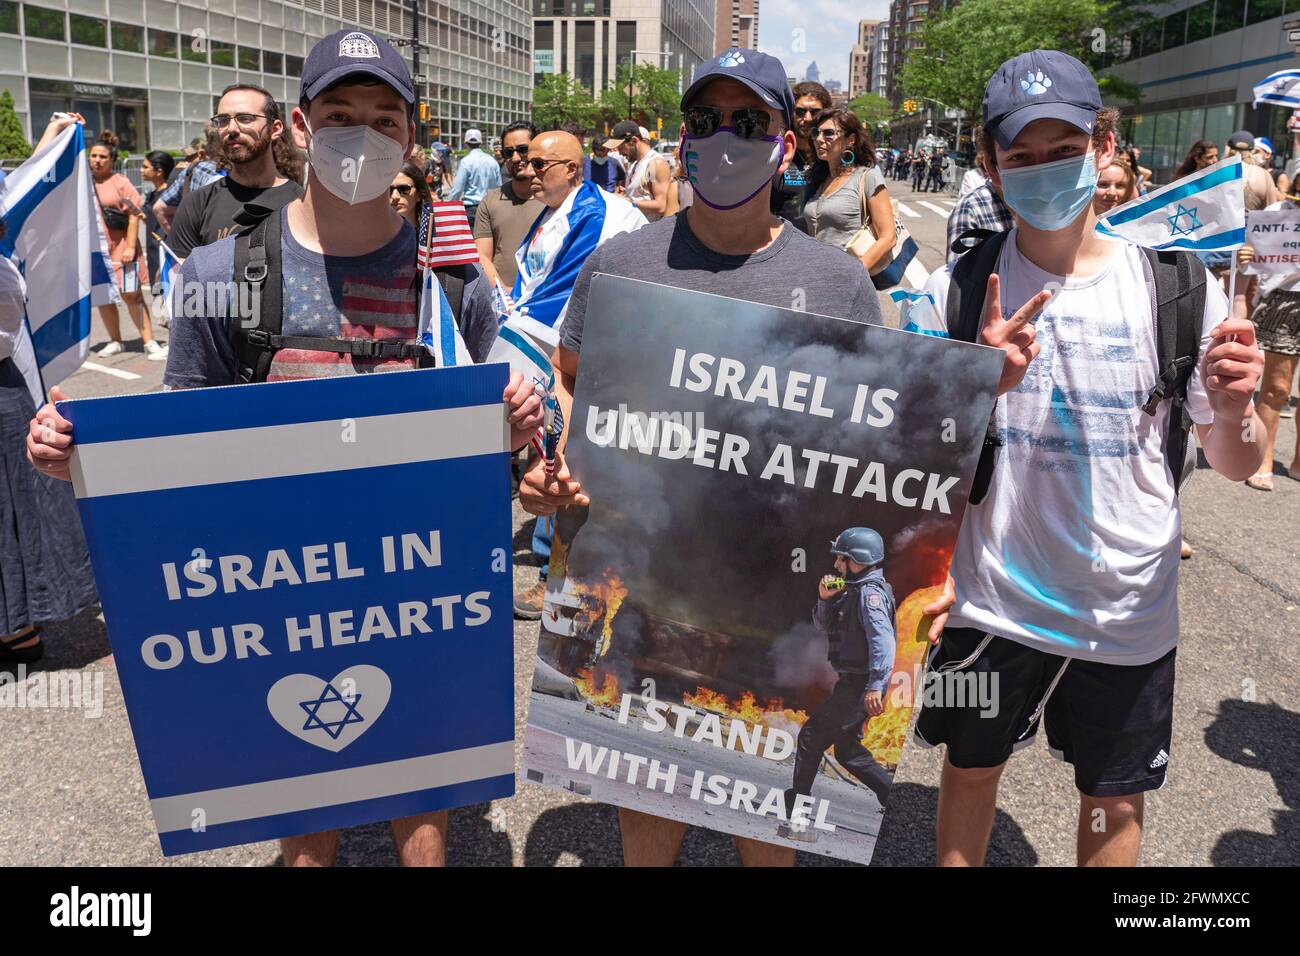 NEW YORK, NY - MAY 23: Pro-Israel supporters hold signs that reads 'Israel In Our Hearts' and 'Israel Is Under Attack I Stand With Israel' in downtown during a Rally In Support Of Israel and Against Antisemitism on May 23, 2021 in New York City.    Jewish and pro-Israel demonstrators gathered at the site of the World Trade Center, flying Israeli and American flags in solidarity with Israel following the most recent war with Hamas in Gaza, and in protest against rising levels of antisemitism and severe anti-Jewish attacks in the wake of the conflict. Credit: Ron Adar/Alamy Live News Stock Photo